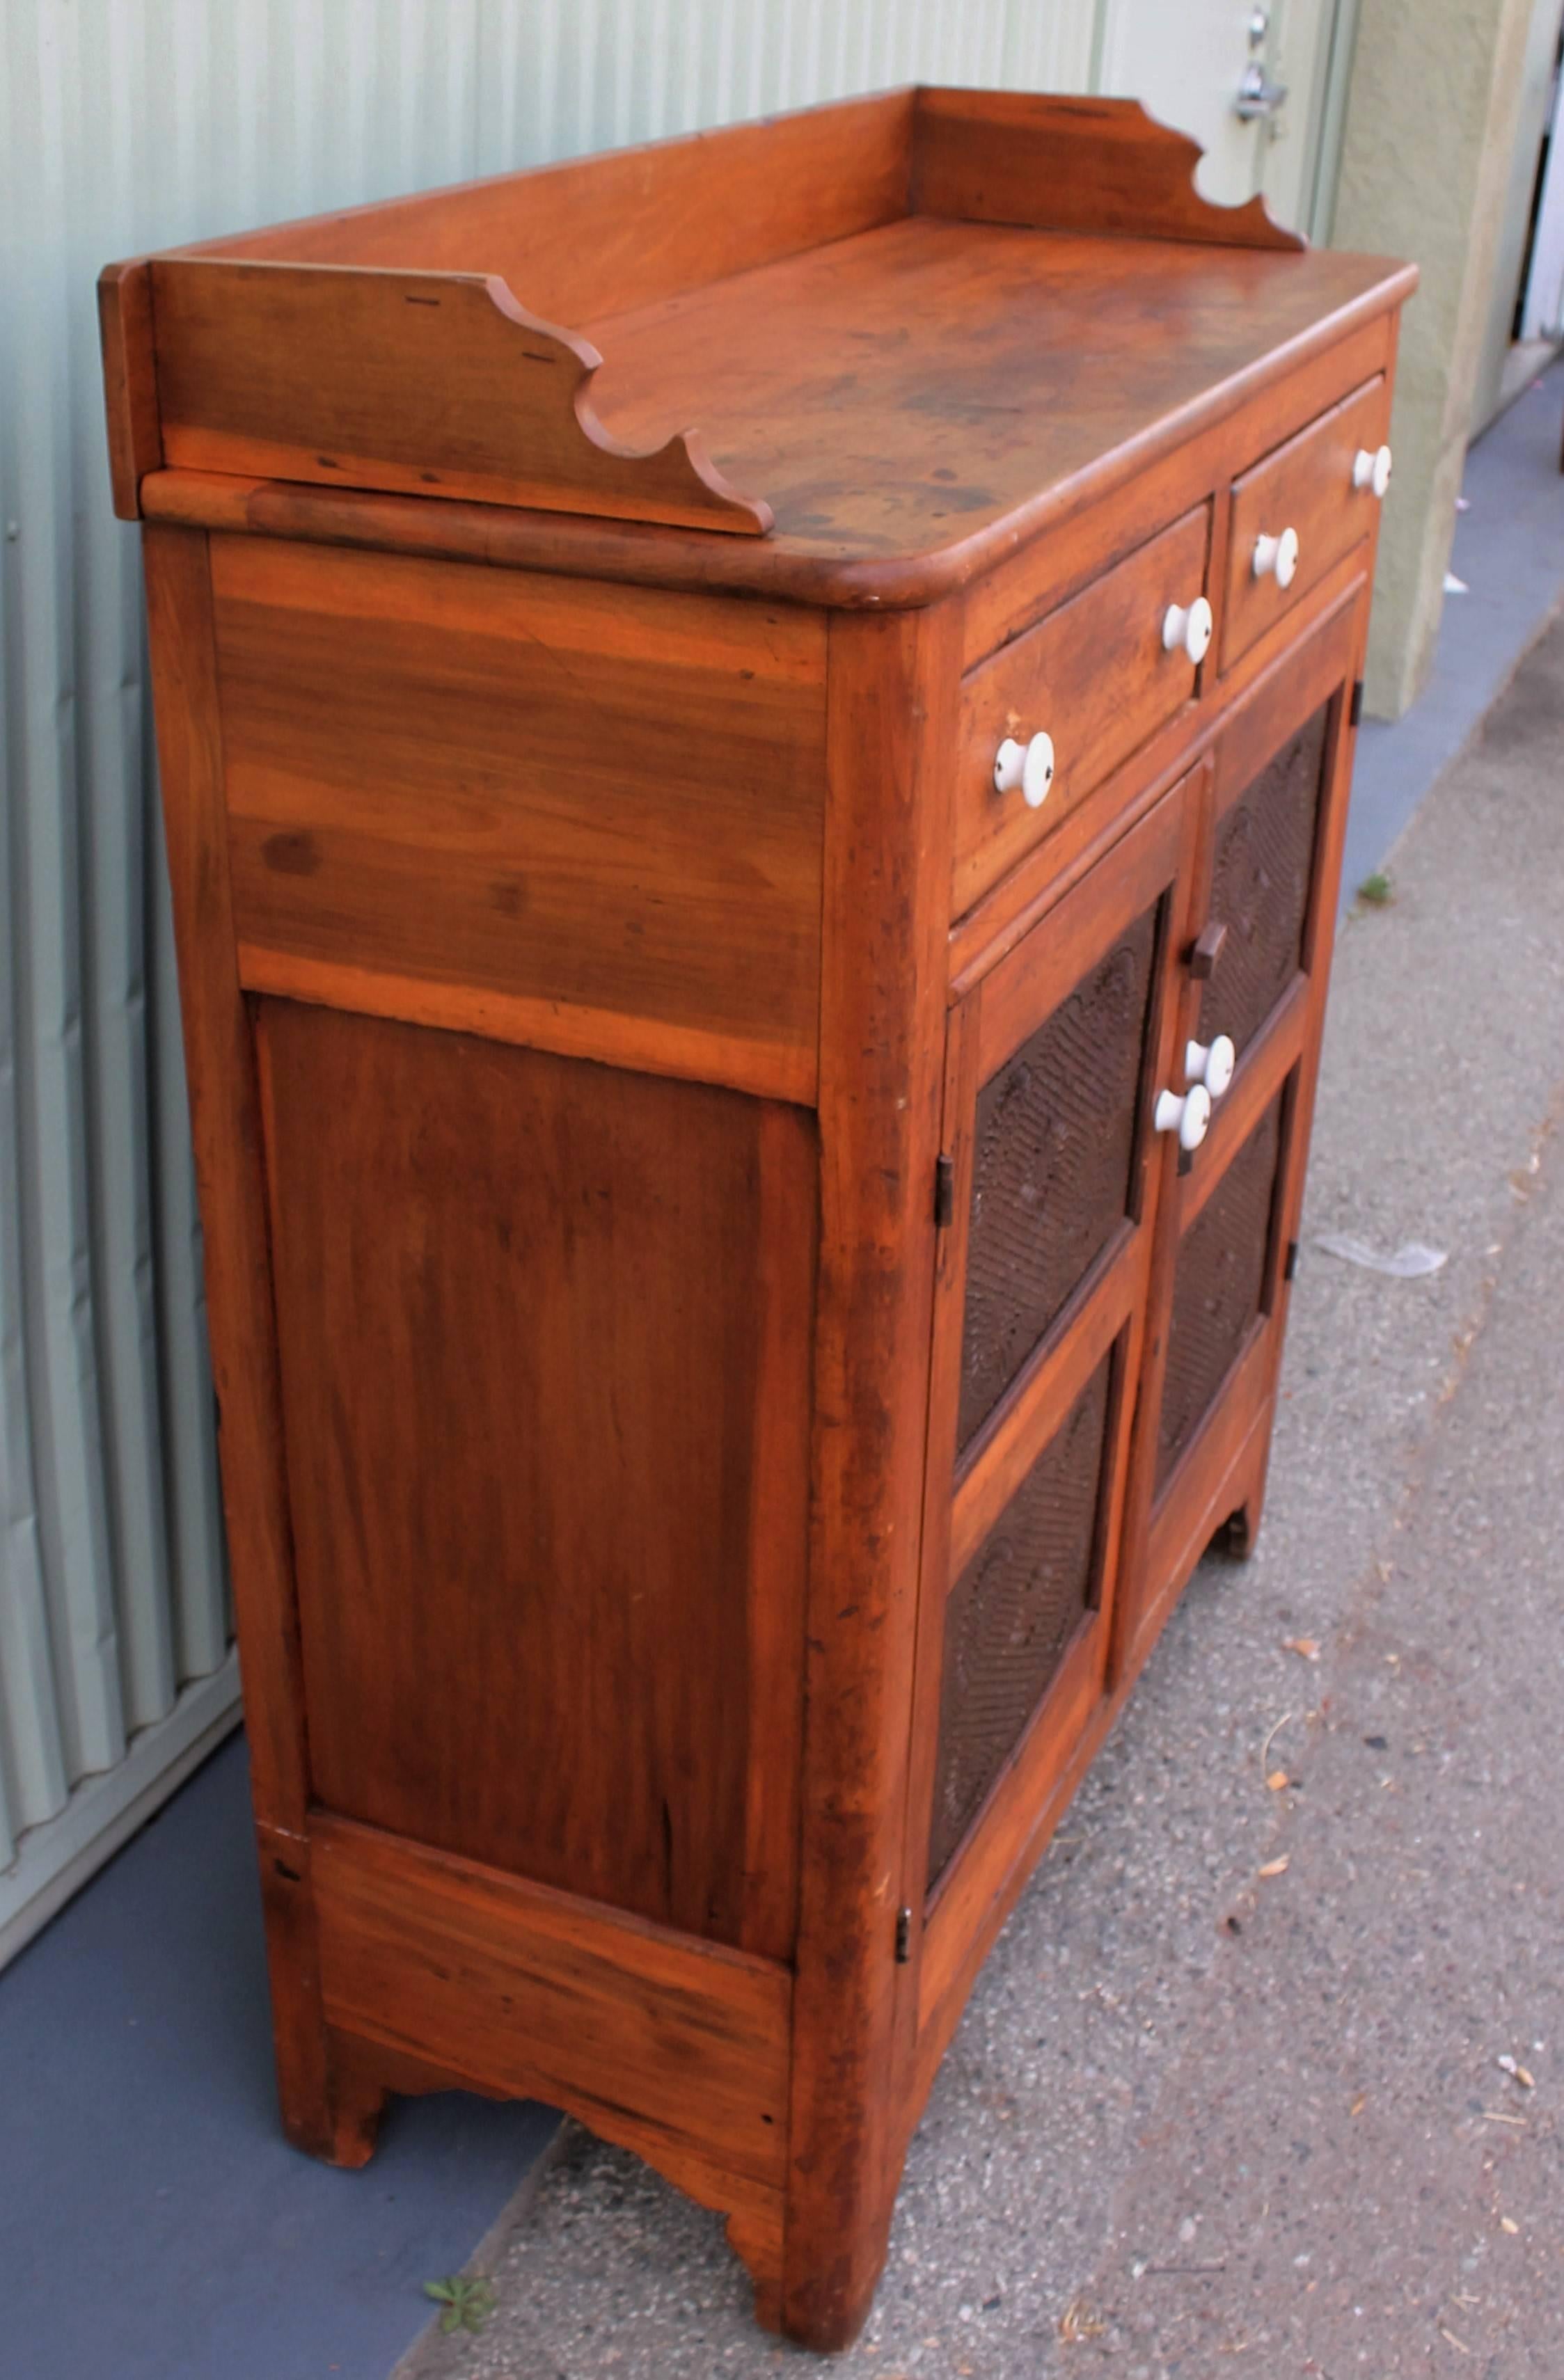 This 19th century pine two-drawer over two-door pie safe is in wonderful condition. The door panels are punched decorated tin in very good as found condition. The drawers are all dovetailed and square nailed construction with original ironstone